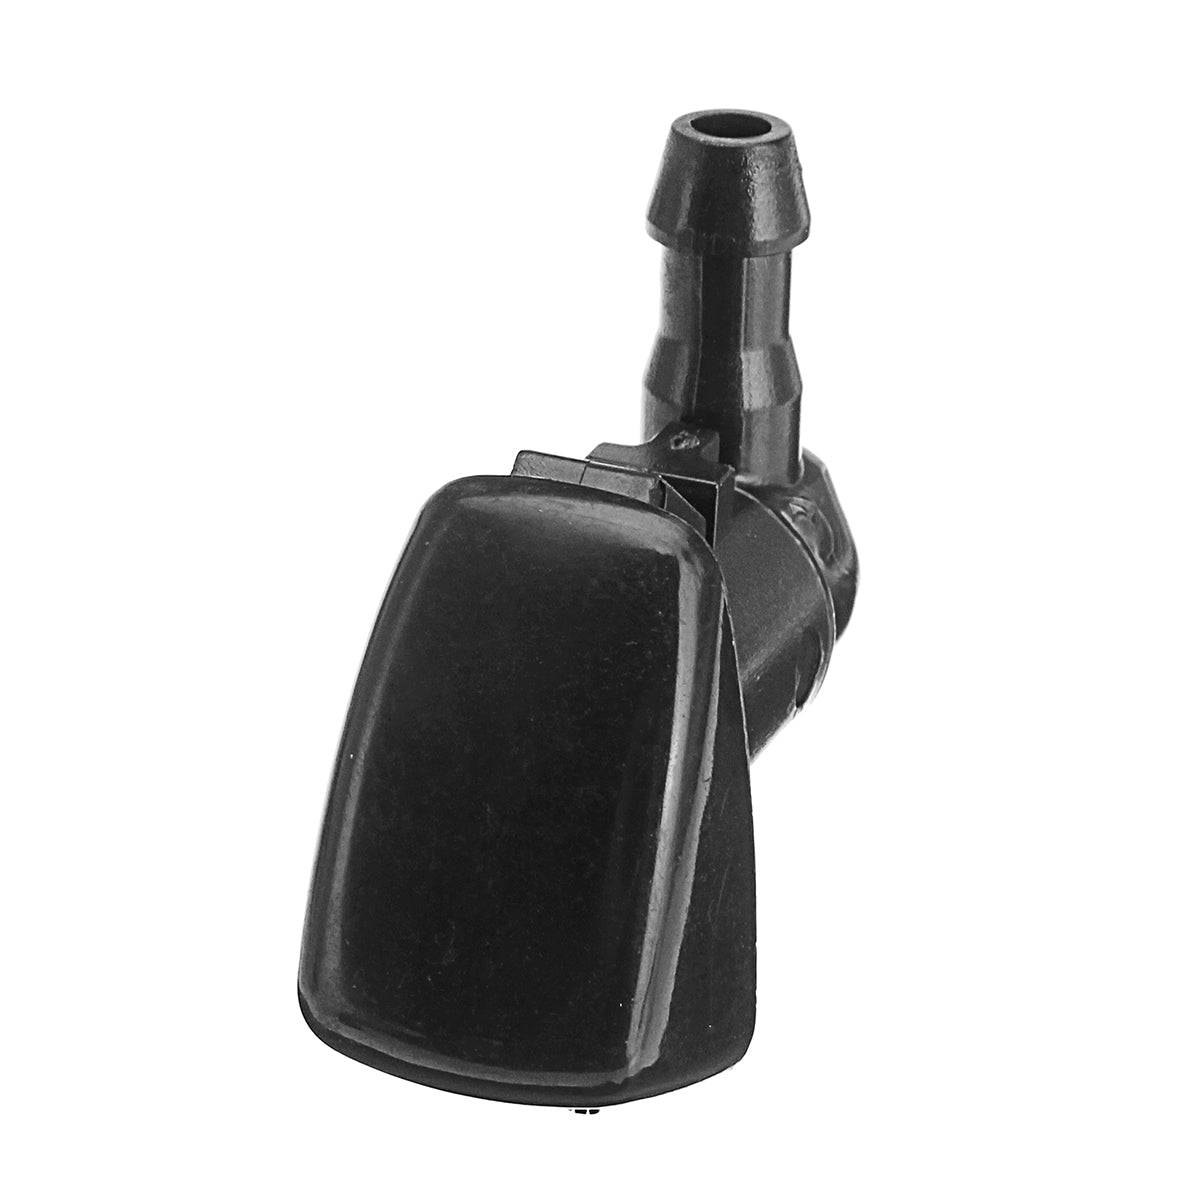 Black Windshield Wiper Water Spray Jet Washer Nozzle for Jeep Grand Cherokee 2005-2010